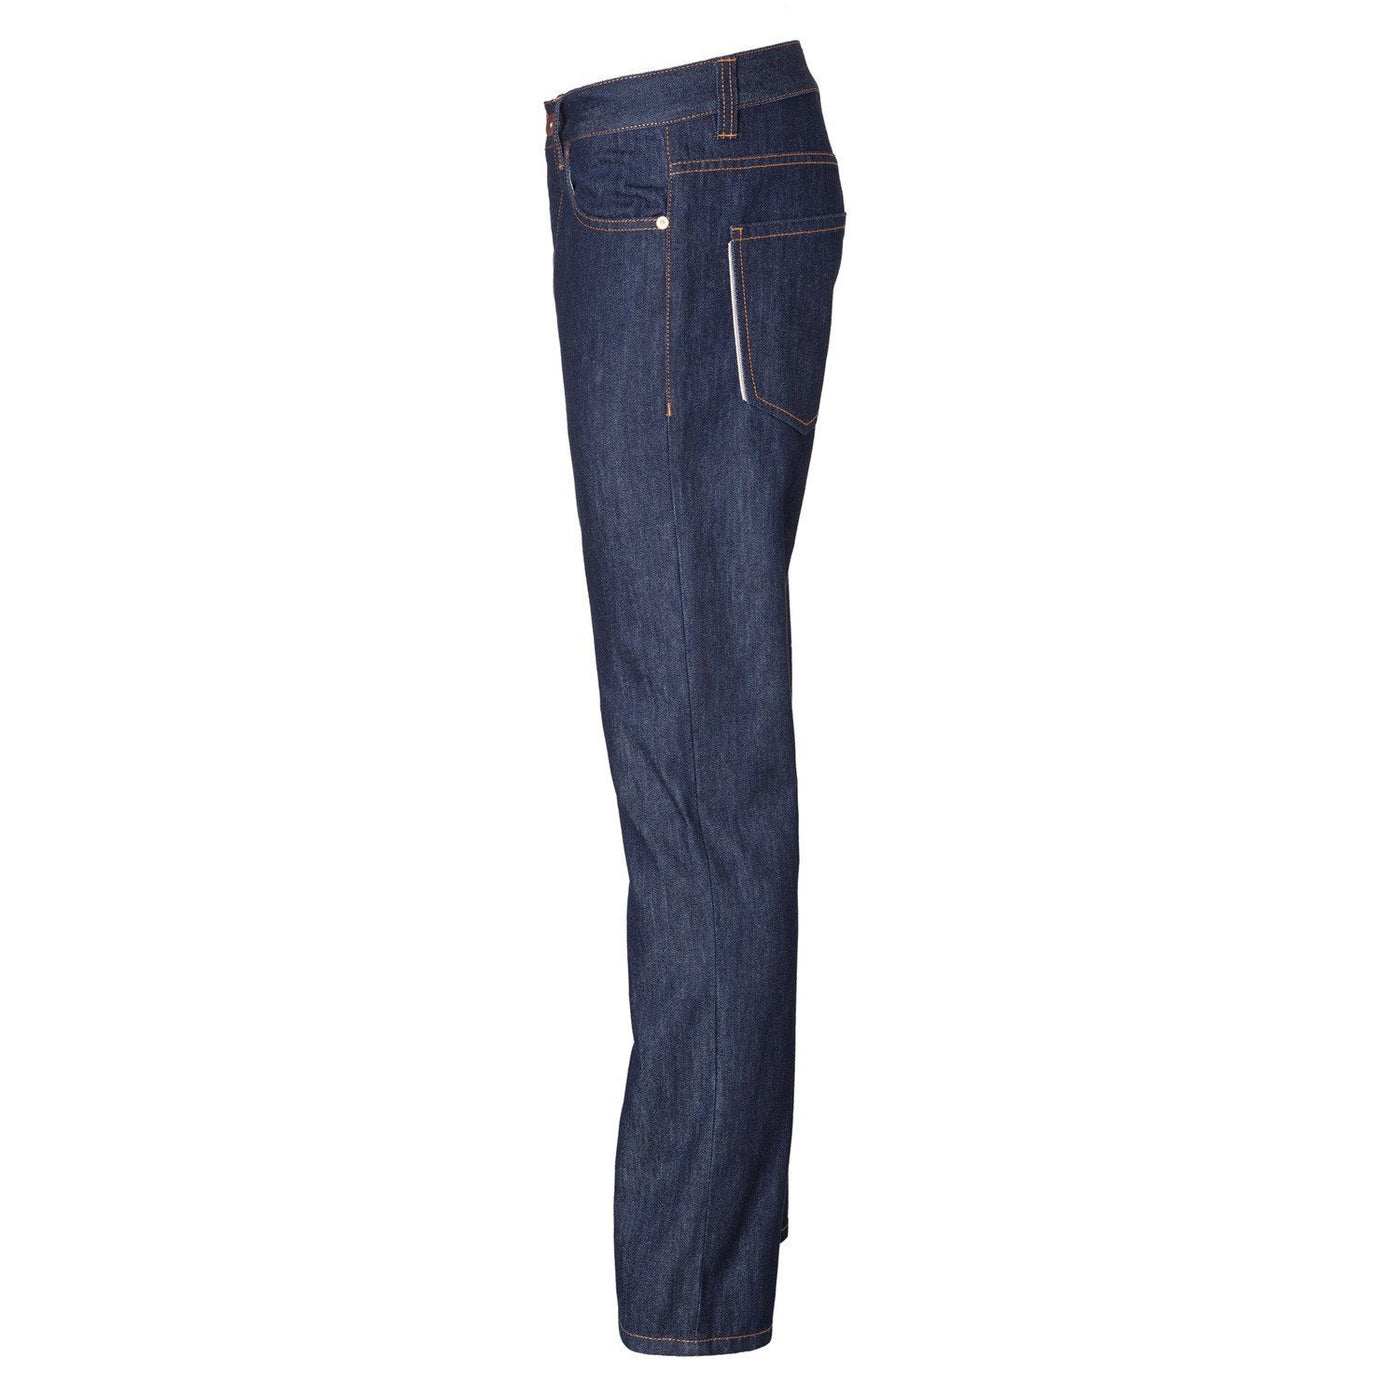 Mens Straight Jeans - Raw One Wash